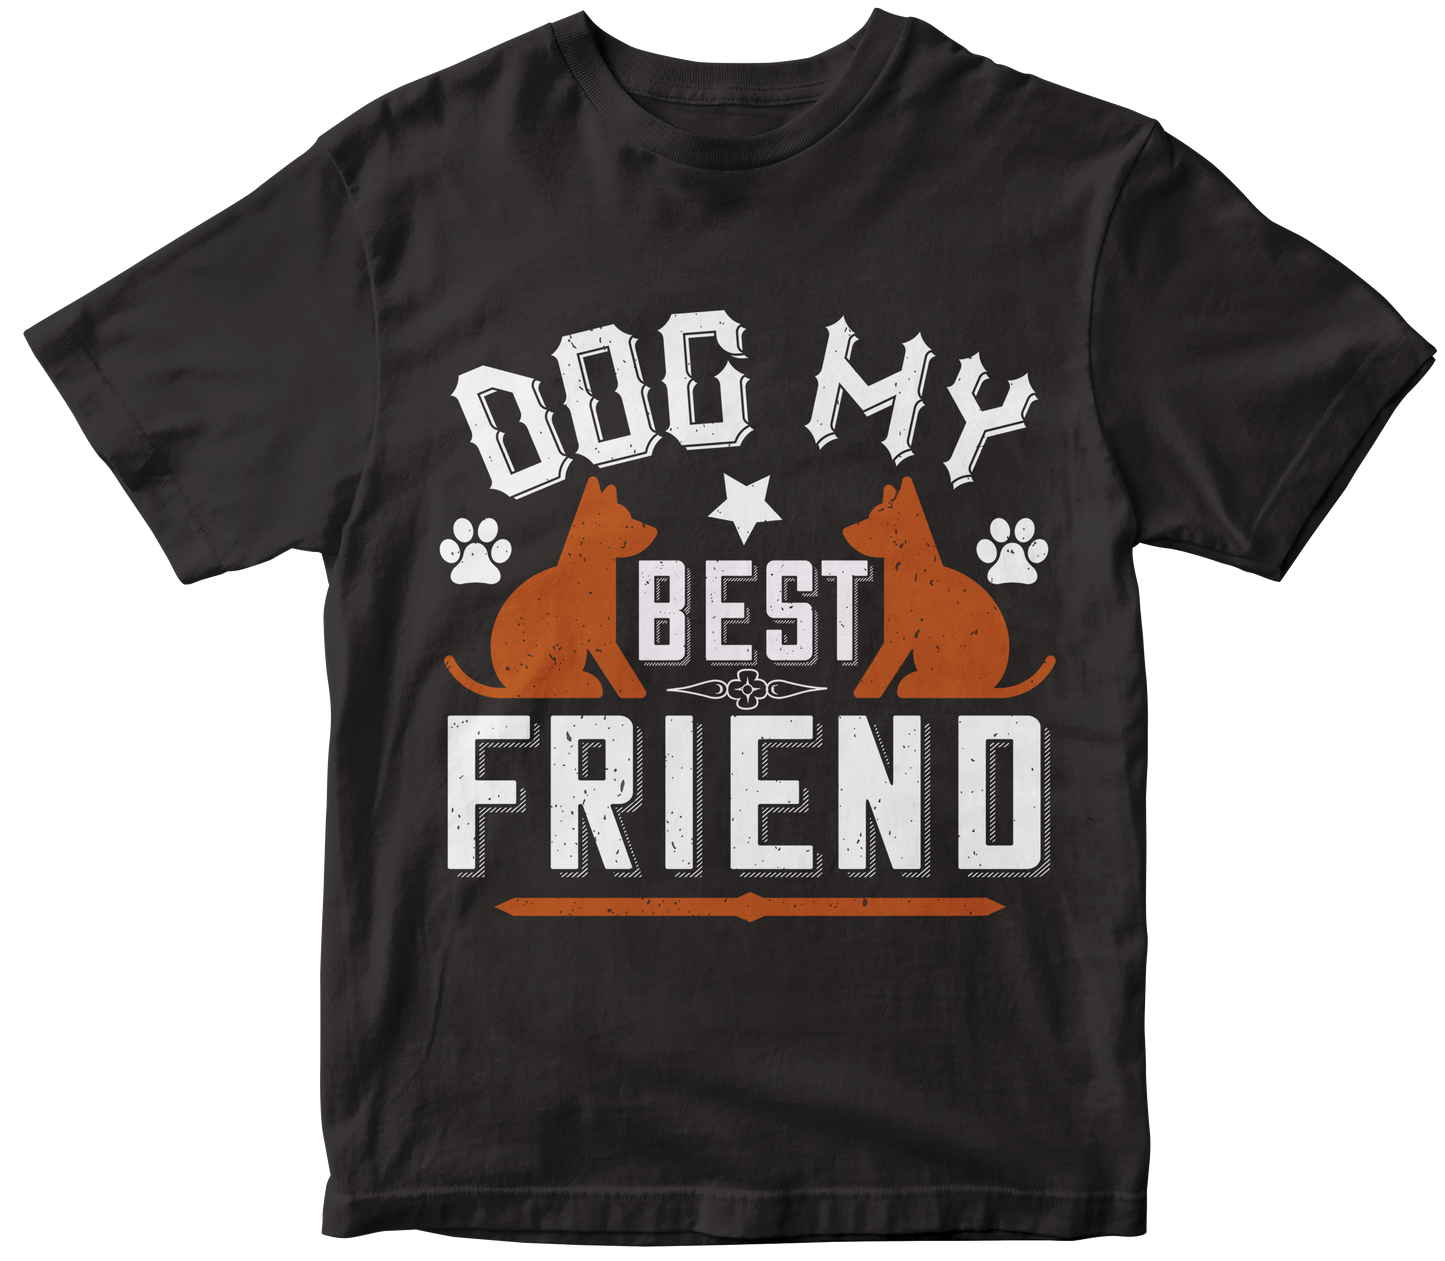 Dog My Best Friend t-shirt - Premium t-shirt from MyDesigns - Just $19.95! Shop now at Lees Krazy Teez